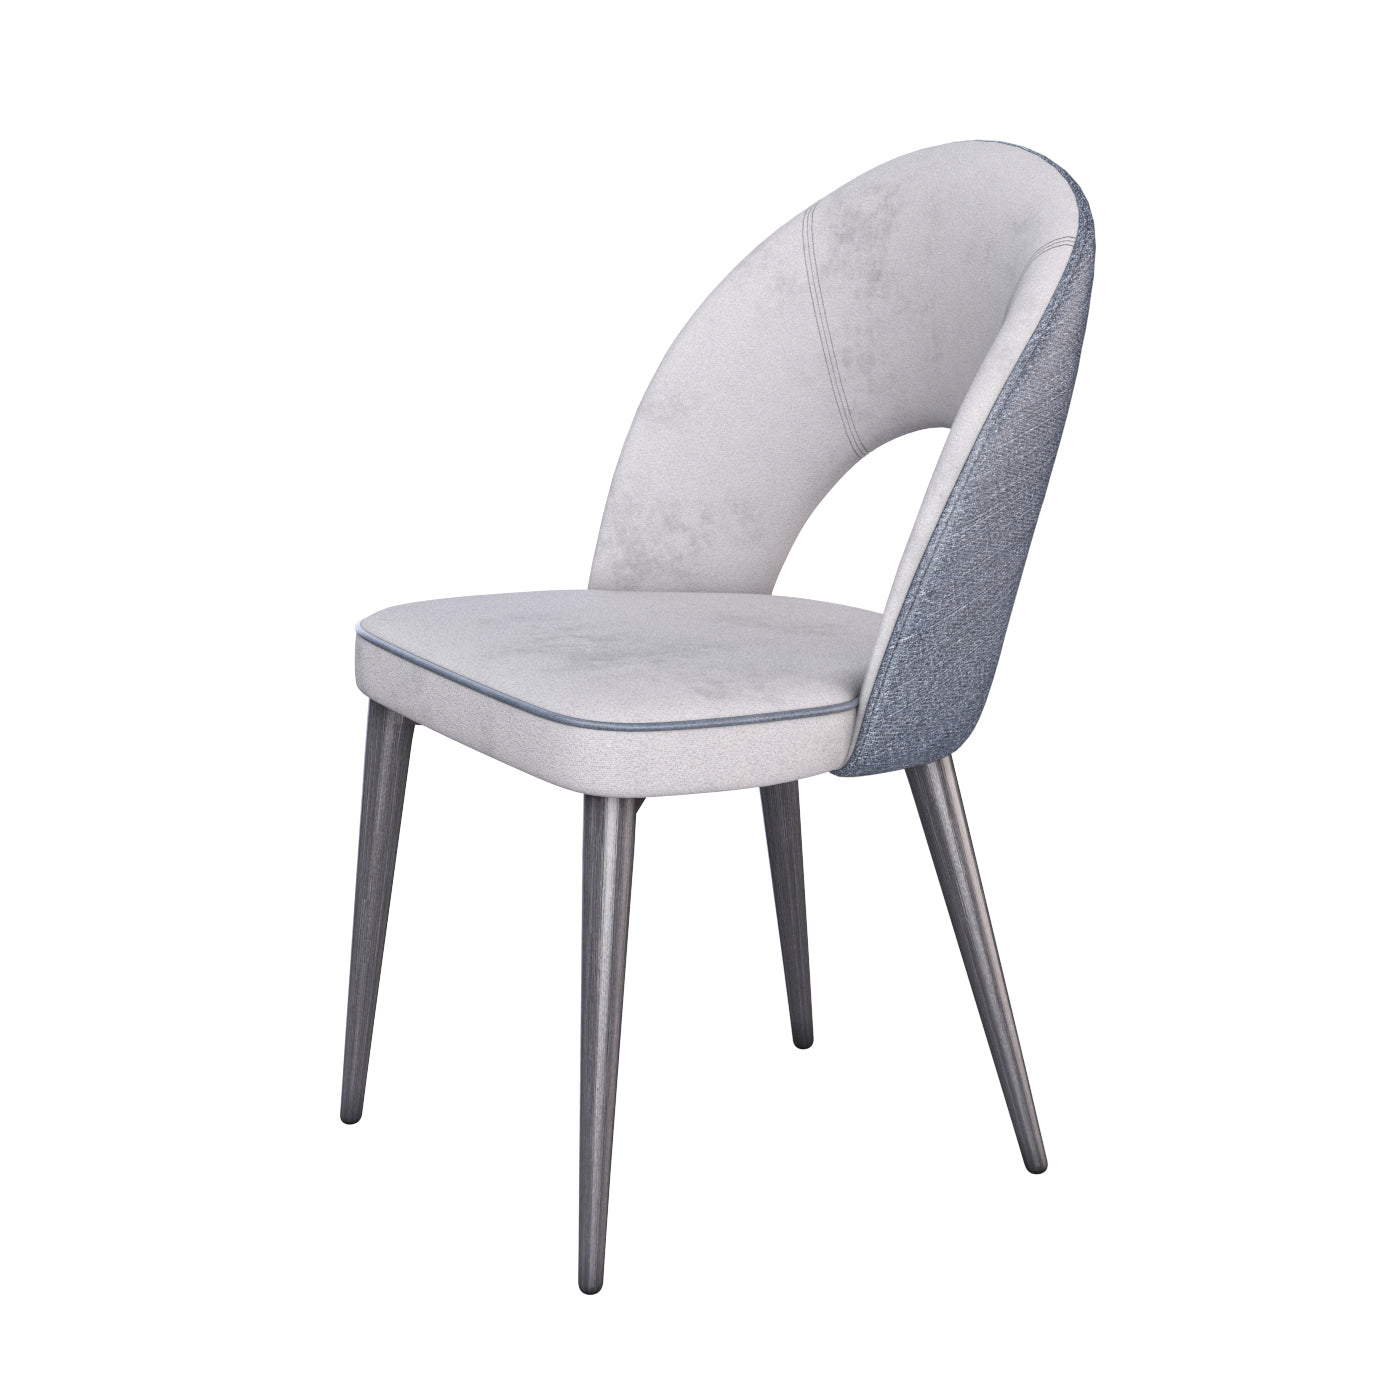 Modena Grey Two Tone Dining Chair